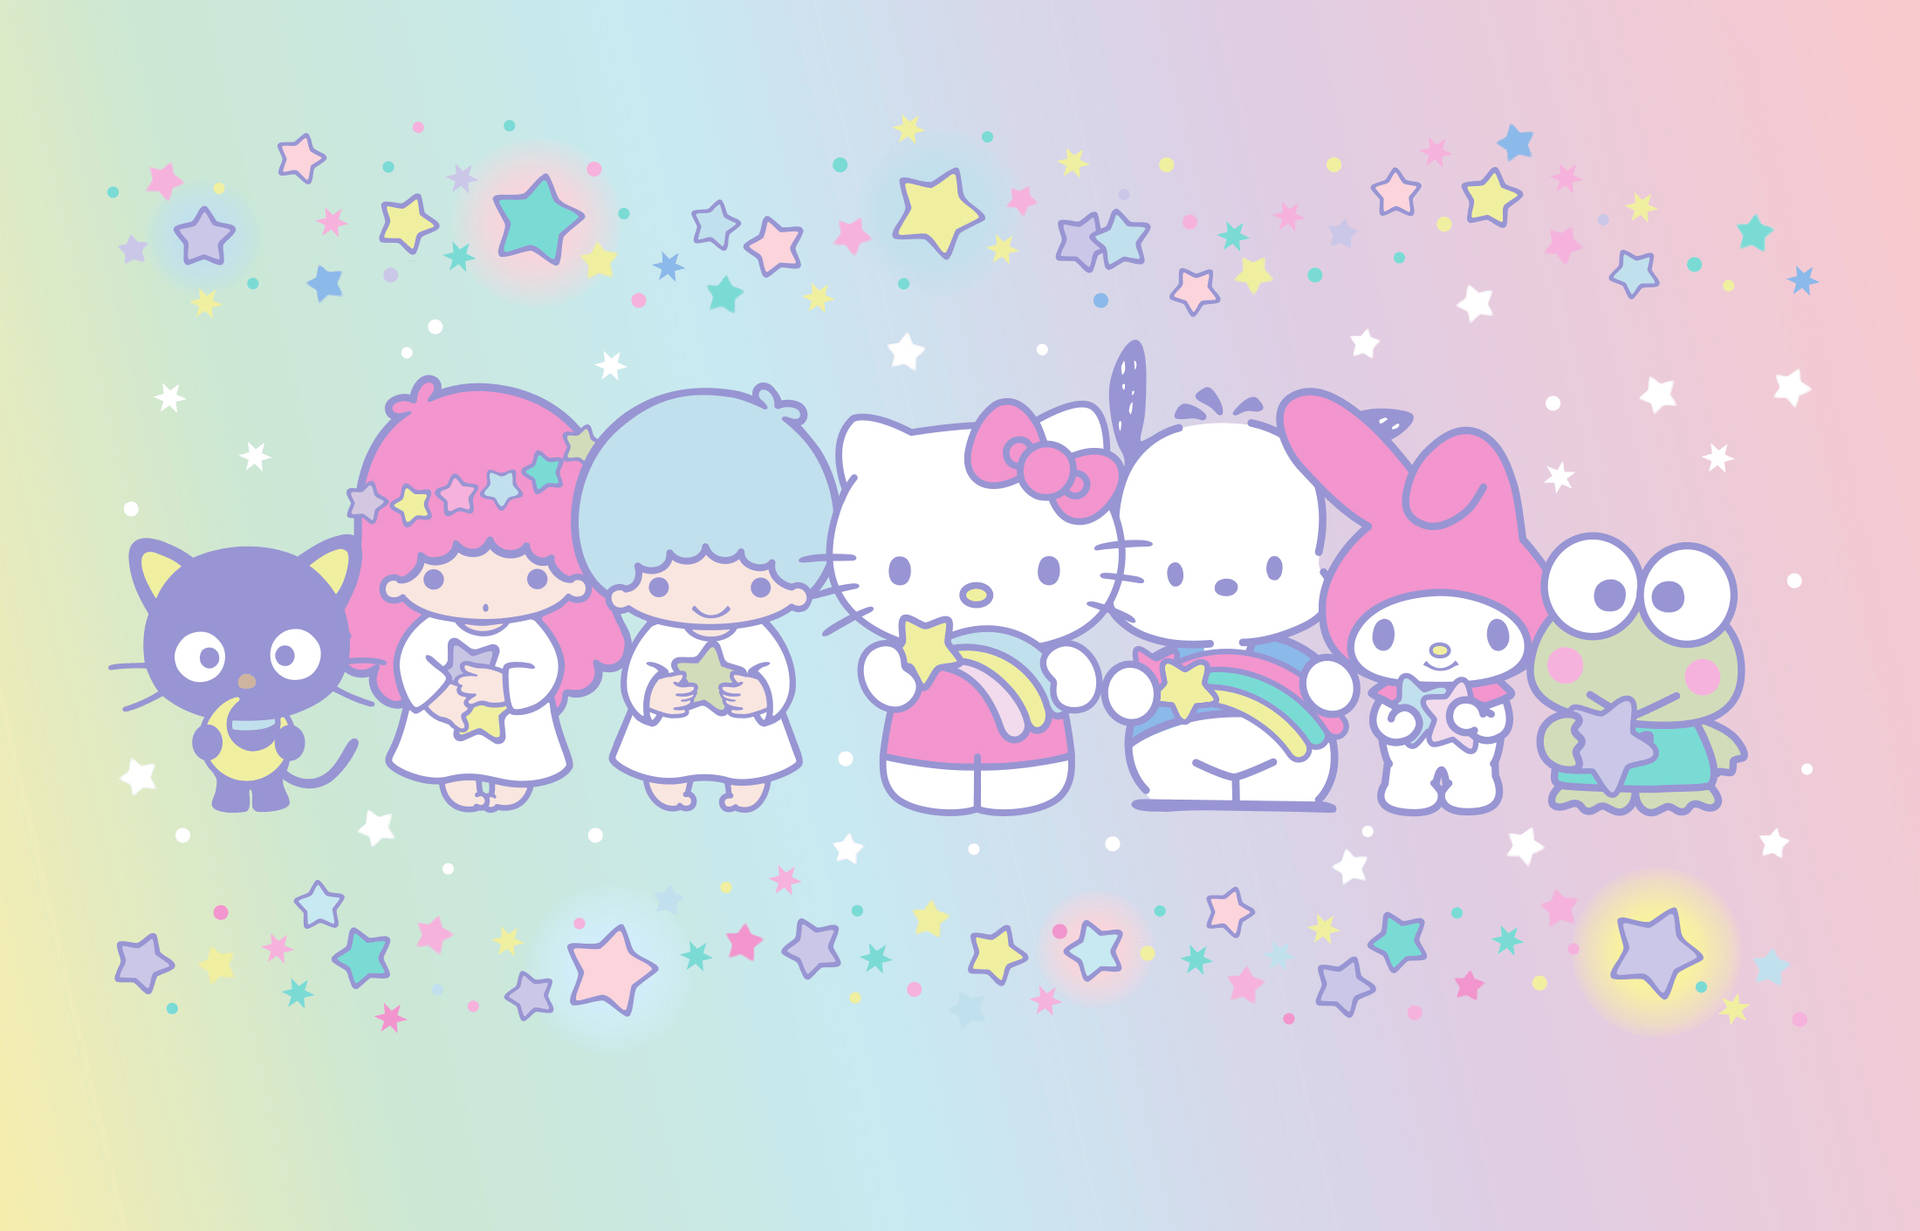 Let's smile and have a bright day with Cute Sanrio! Wallpaper